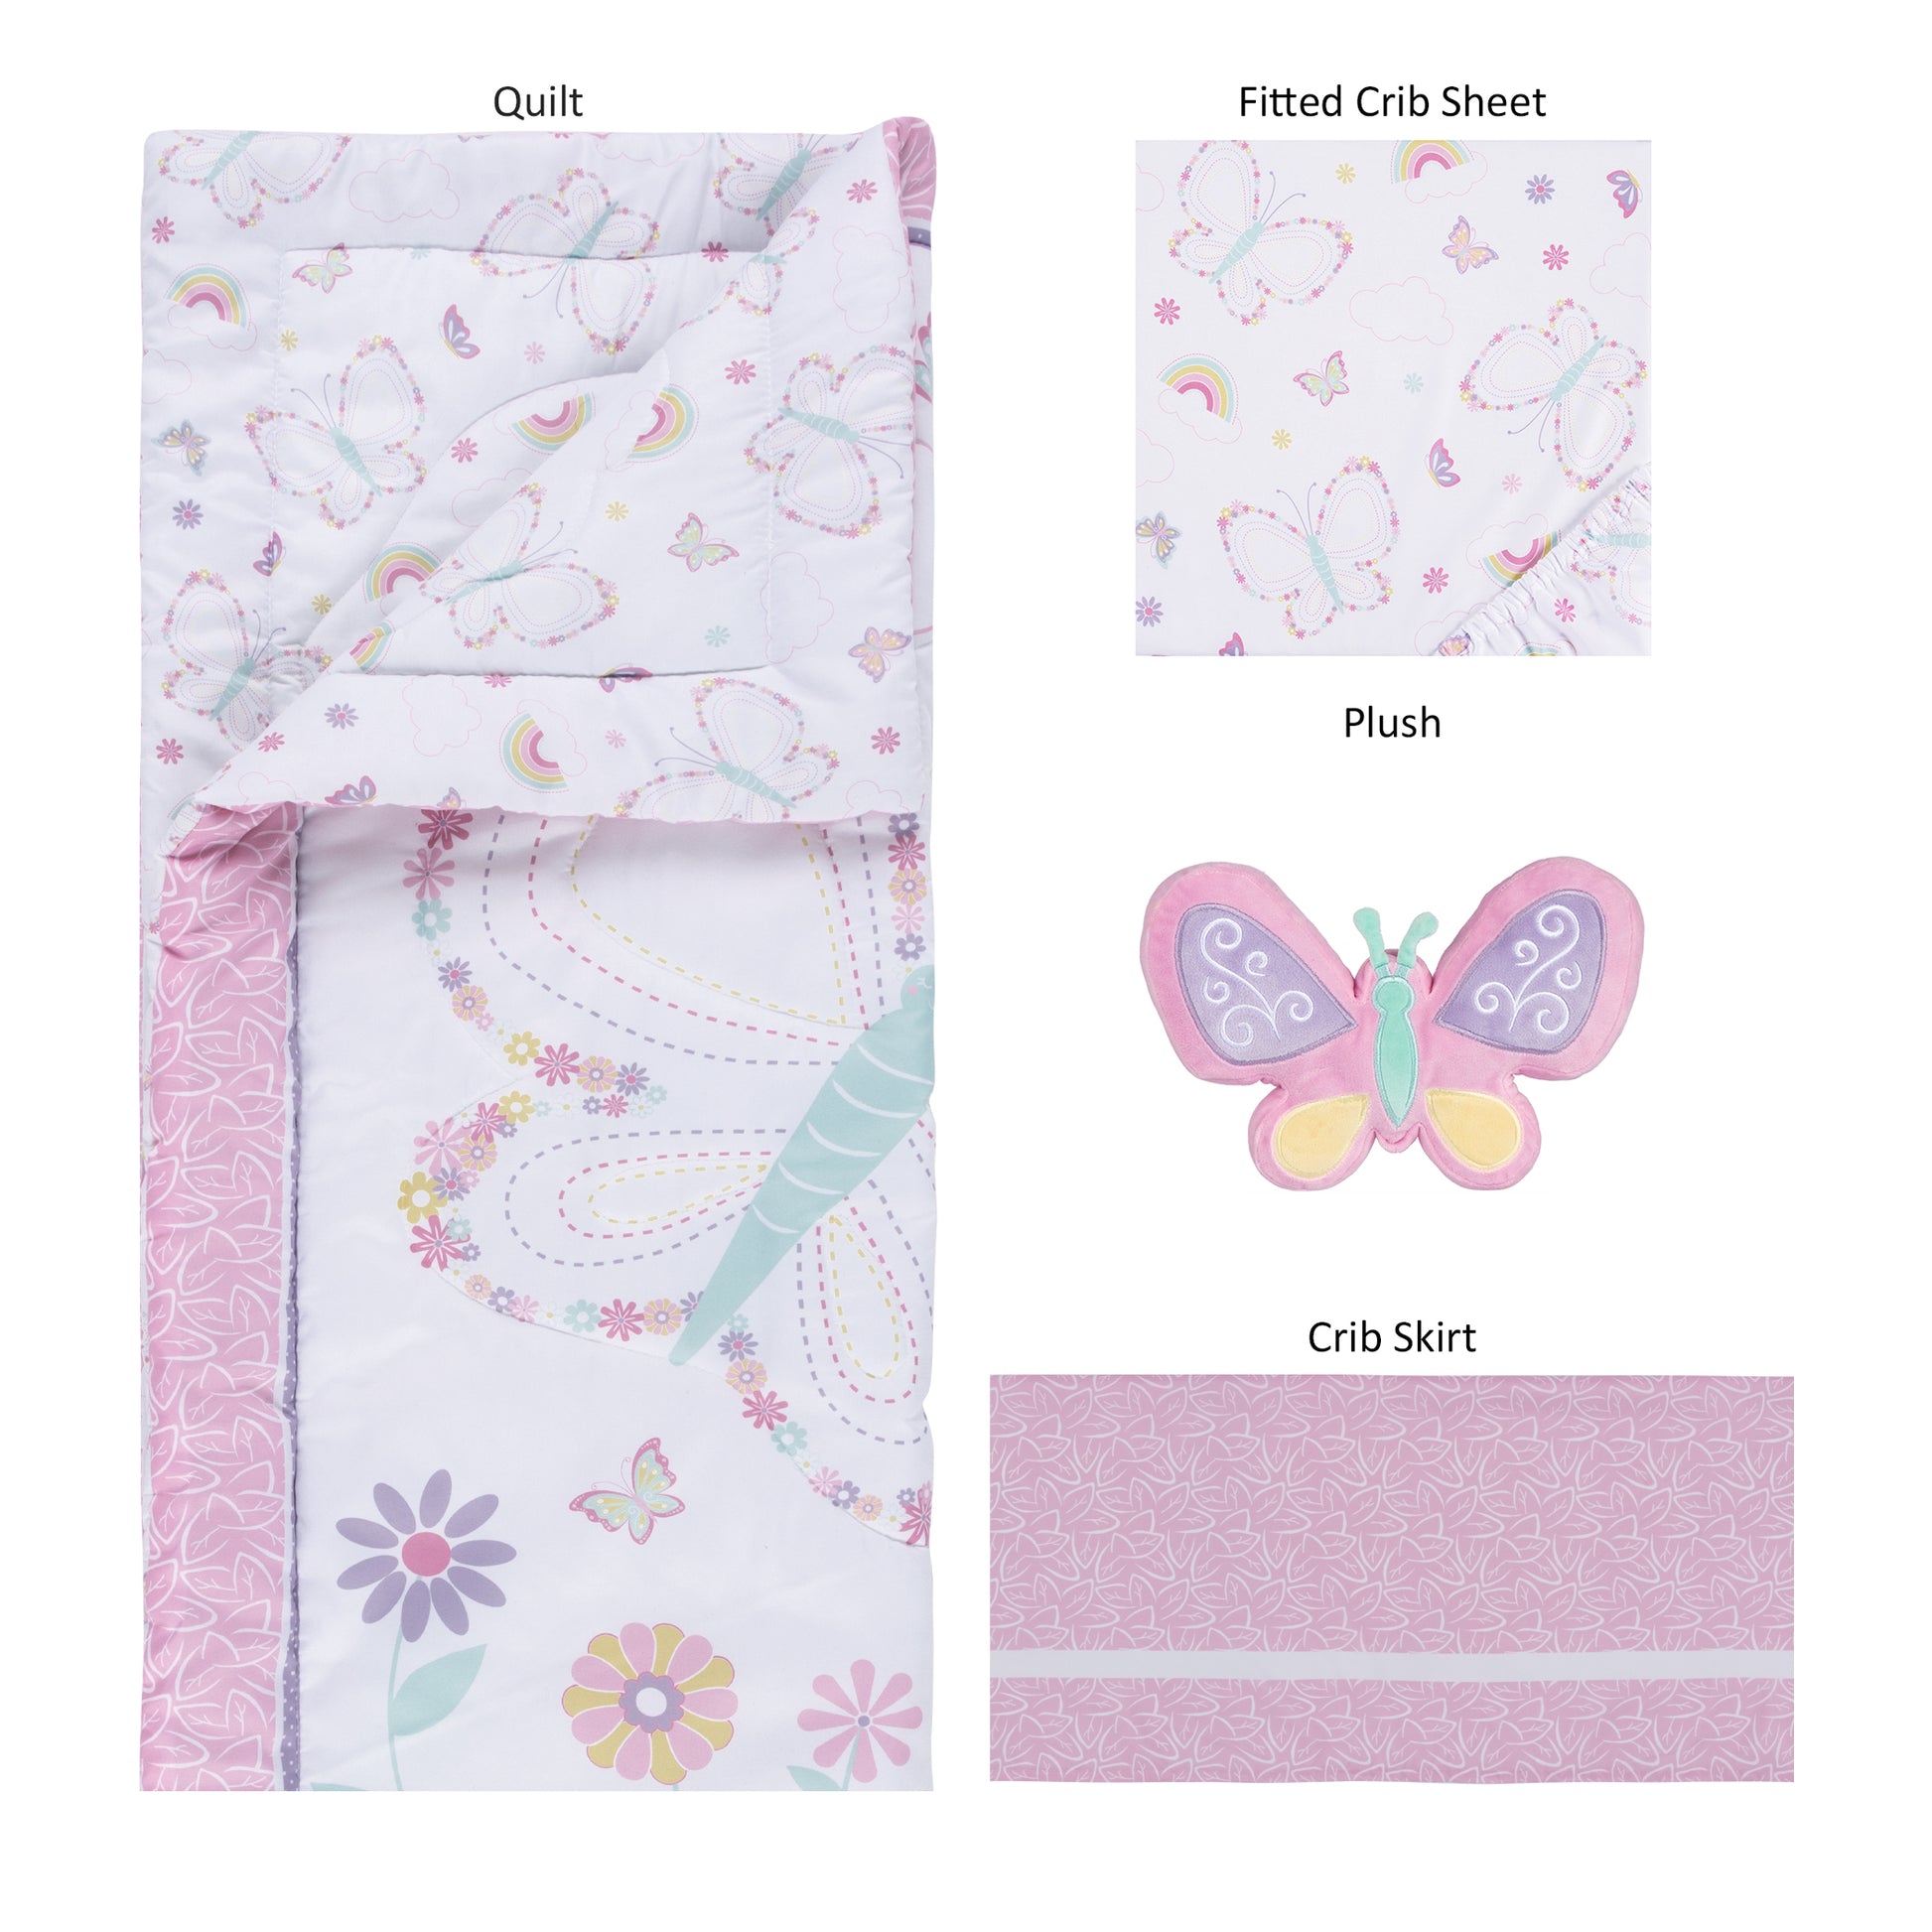 Floral Butterfly 4 Piece Crib Bedding Set; pieces laid out includes nursery quilt, crib sheet, crib skirt and butterfly plush toy